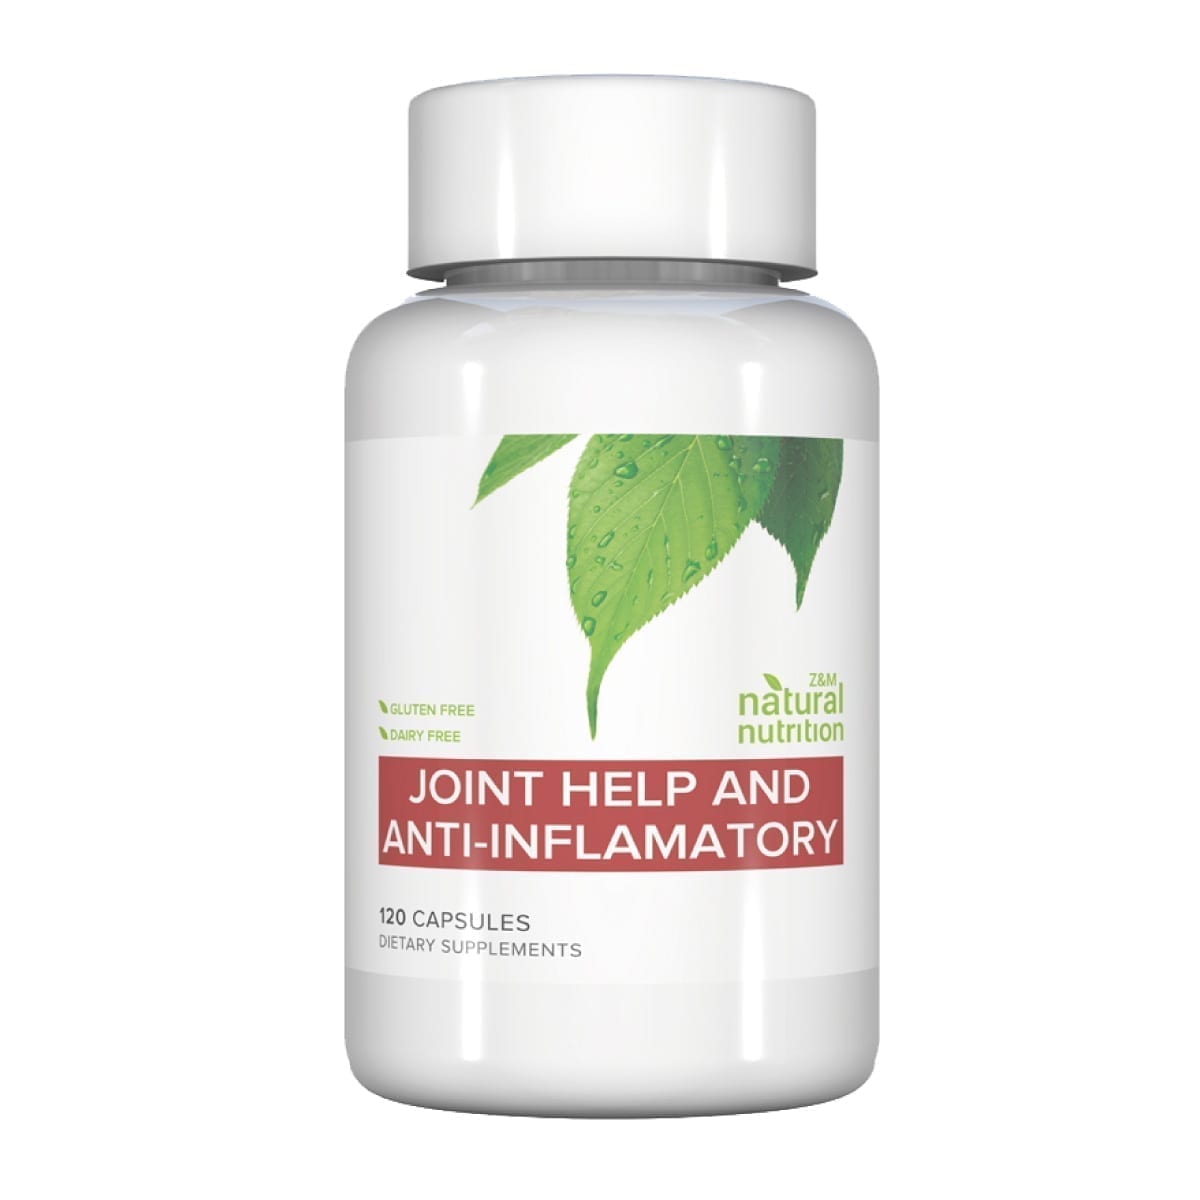 Pain Relief Complex*, Bone & Joint, Targeted Solutions, Nutrition